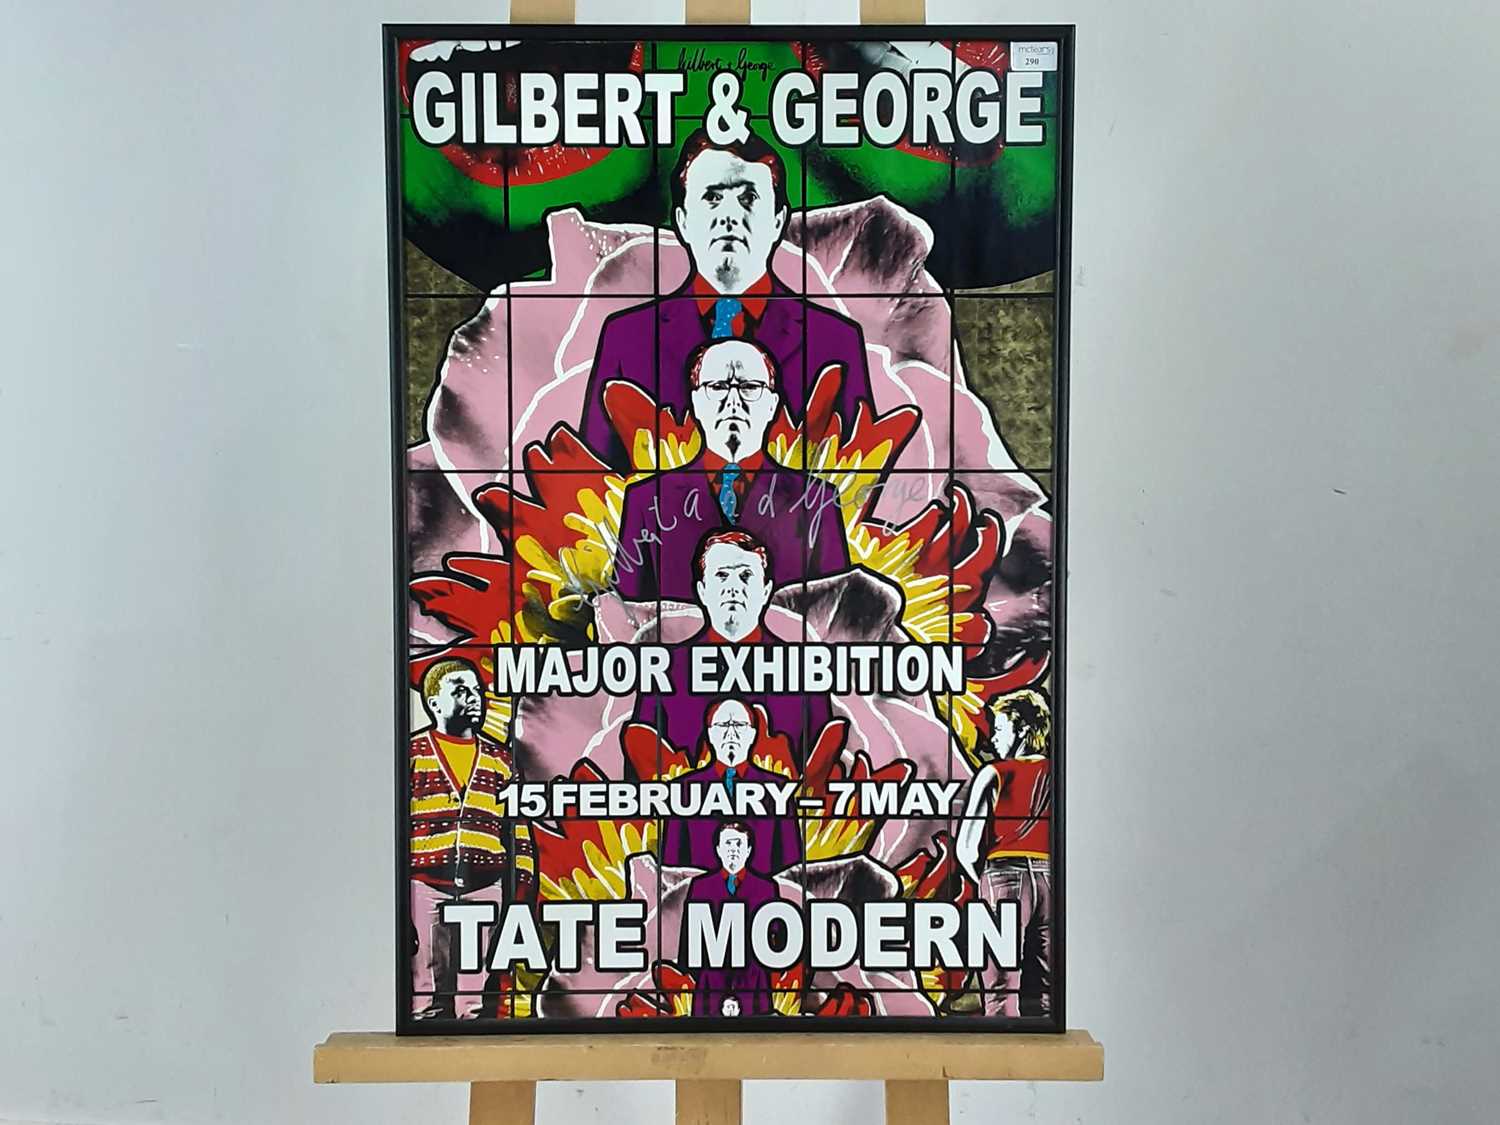 Lot 290 - GILBERT & GEORGE, SIGNED TATE MODERN EXHIBITION POSTER